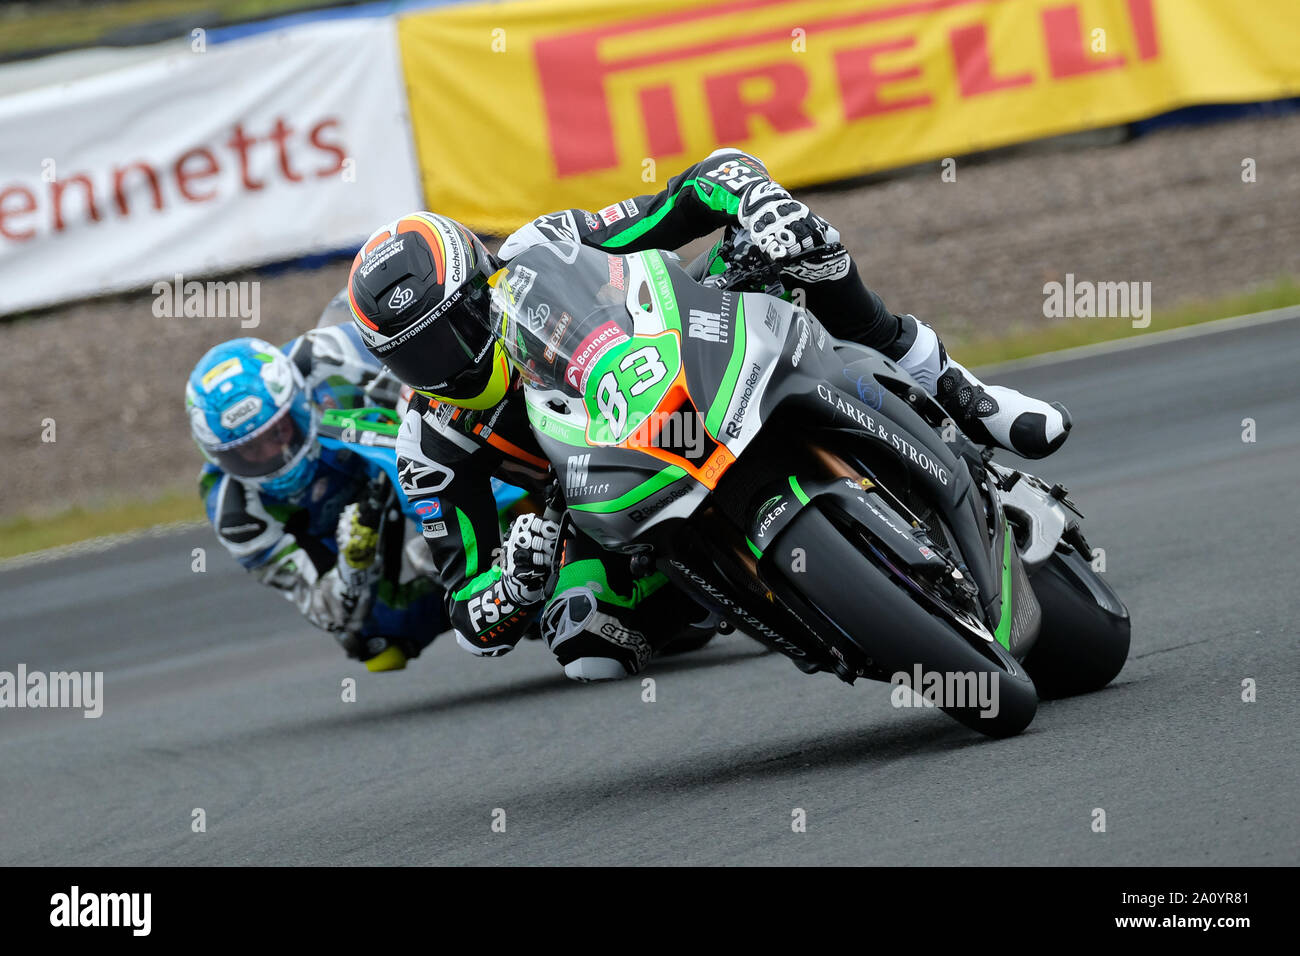 Danny Buchan on the FS-3 Racing Kawasaki All images taken during Round 5 of the 2019 British Superbike Championship at Knockhill Circuit in Fife, All Stock Photo